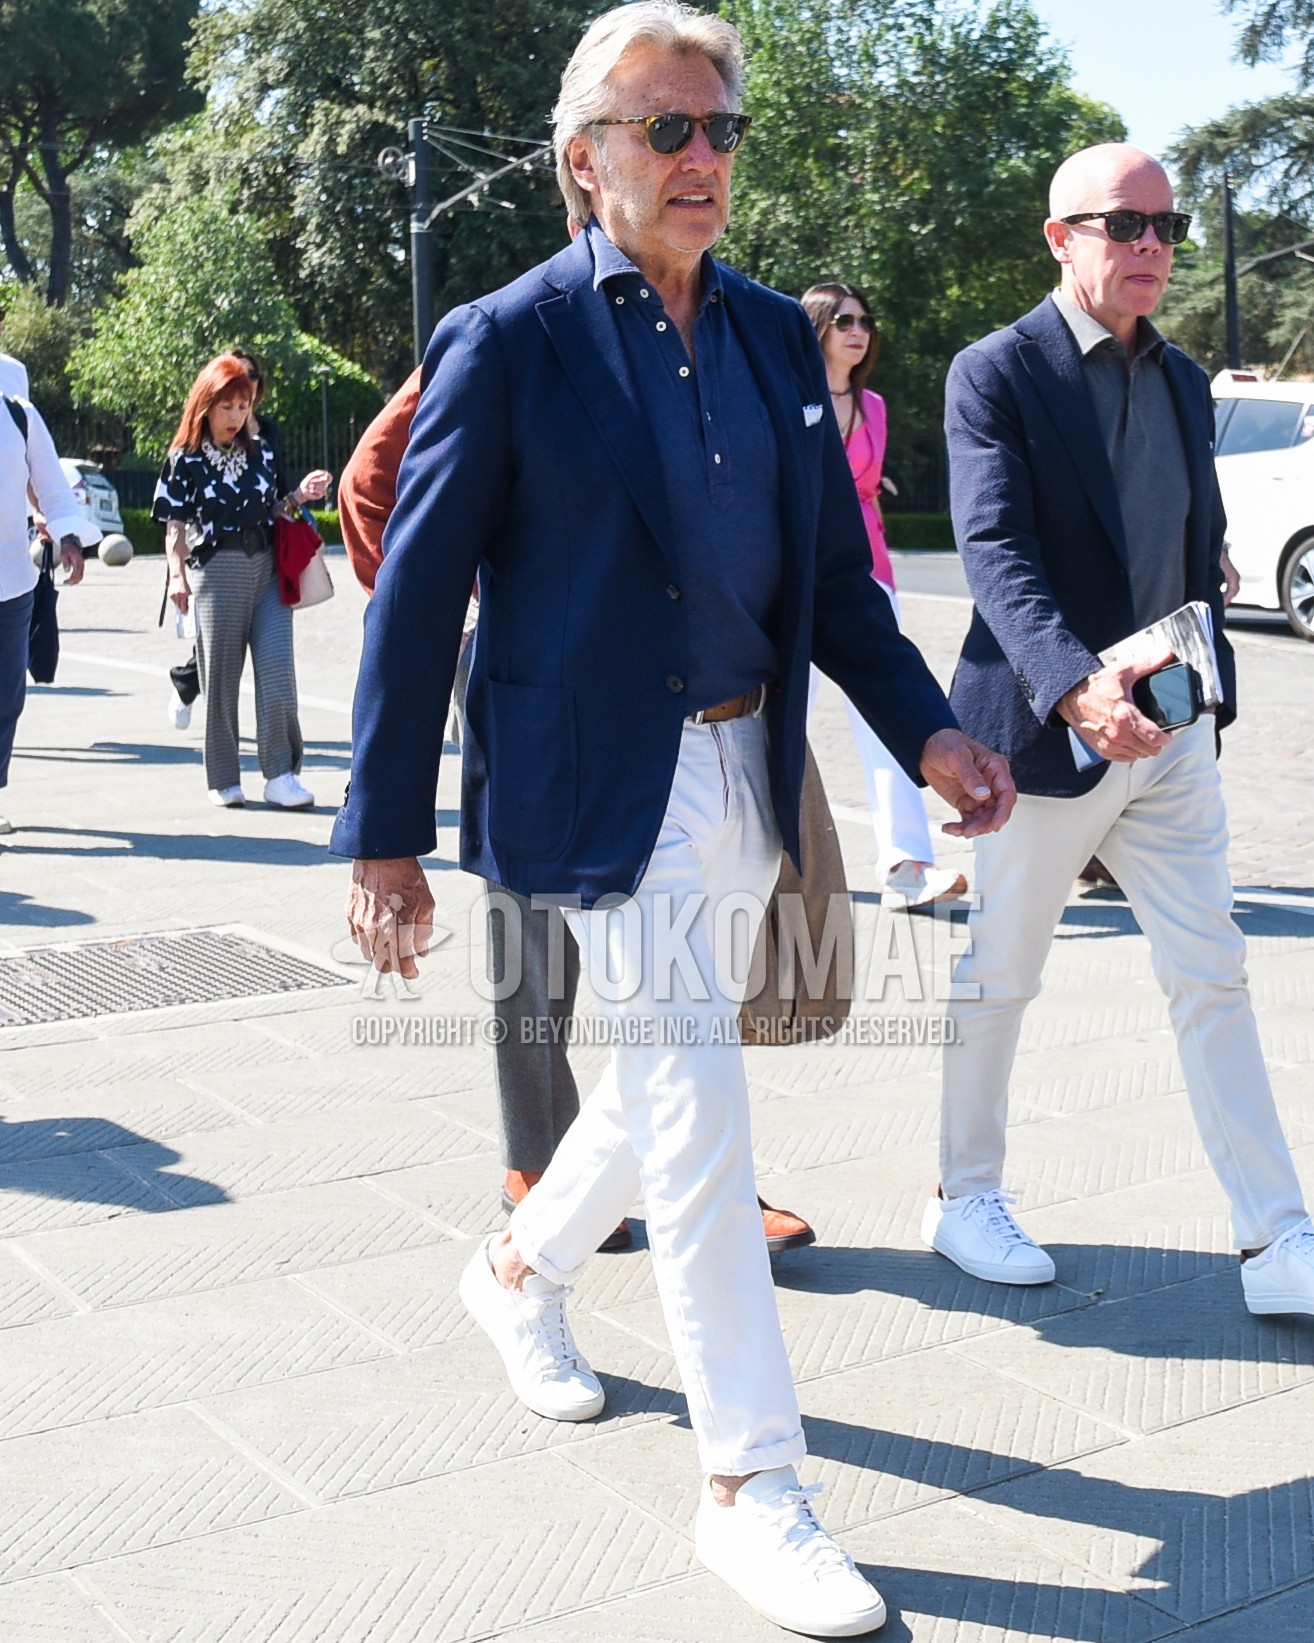 Men's spring summer outfit with brown tortoiseshell sunglasses, navy plain tailored jacket, navy plain polo shirt, brown plain leather belt, white plain cotton pants, white low-cut sneakers.